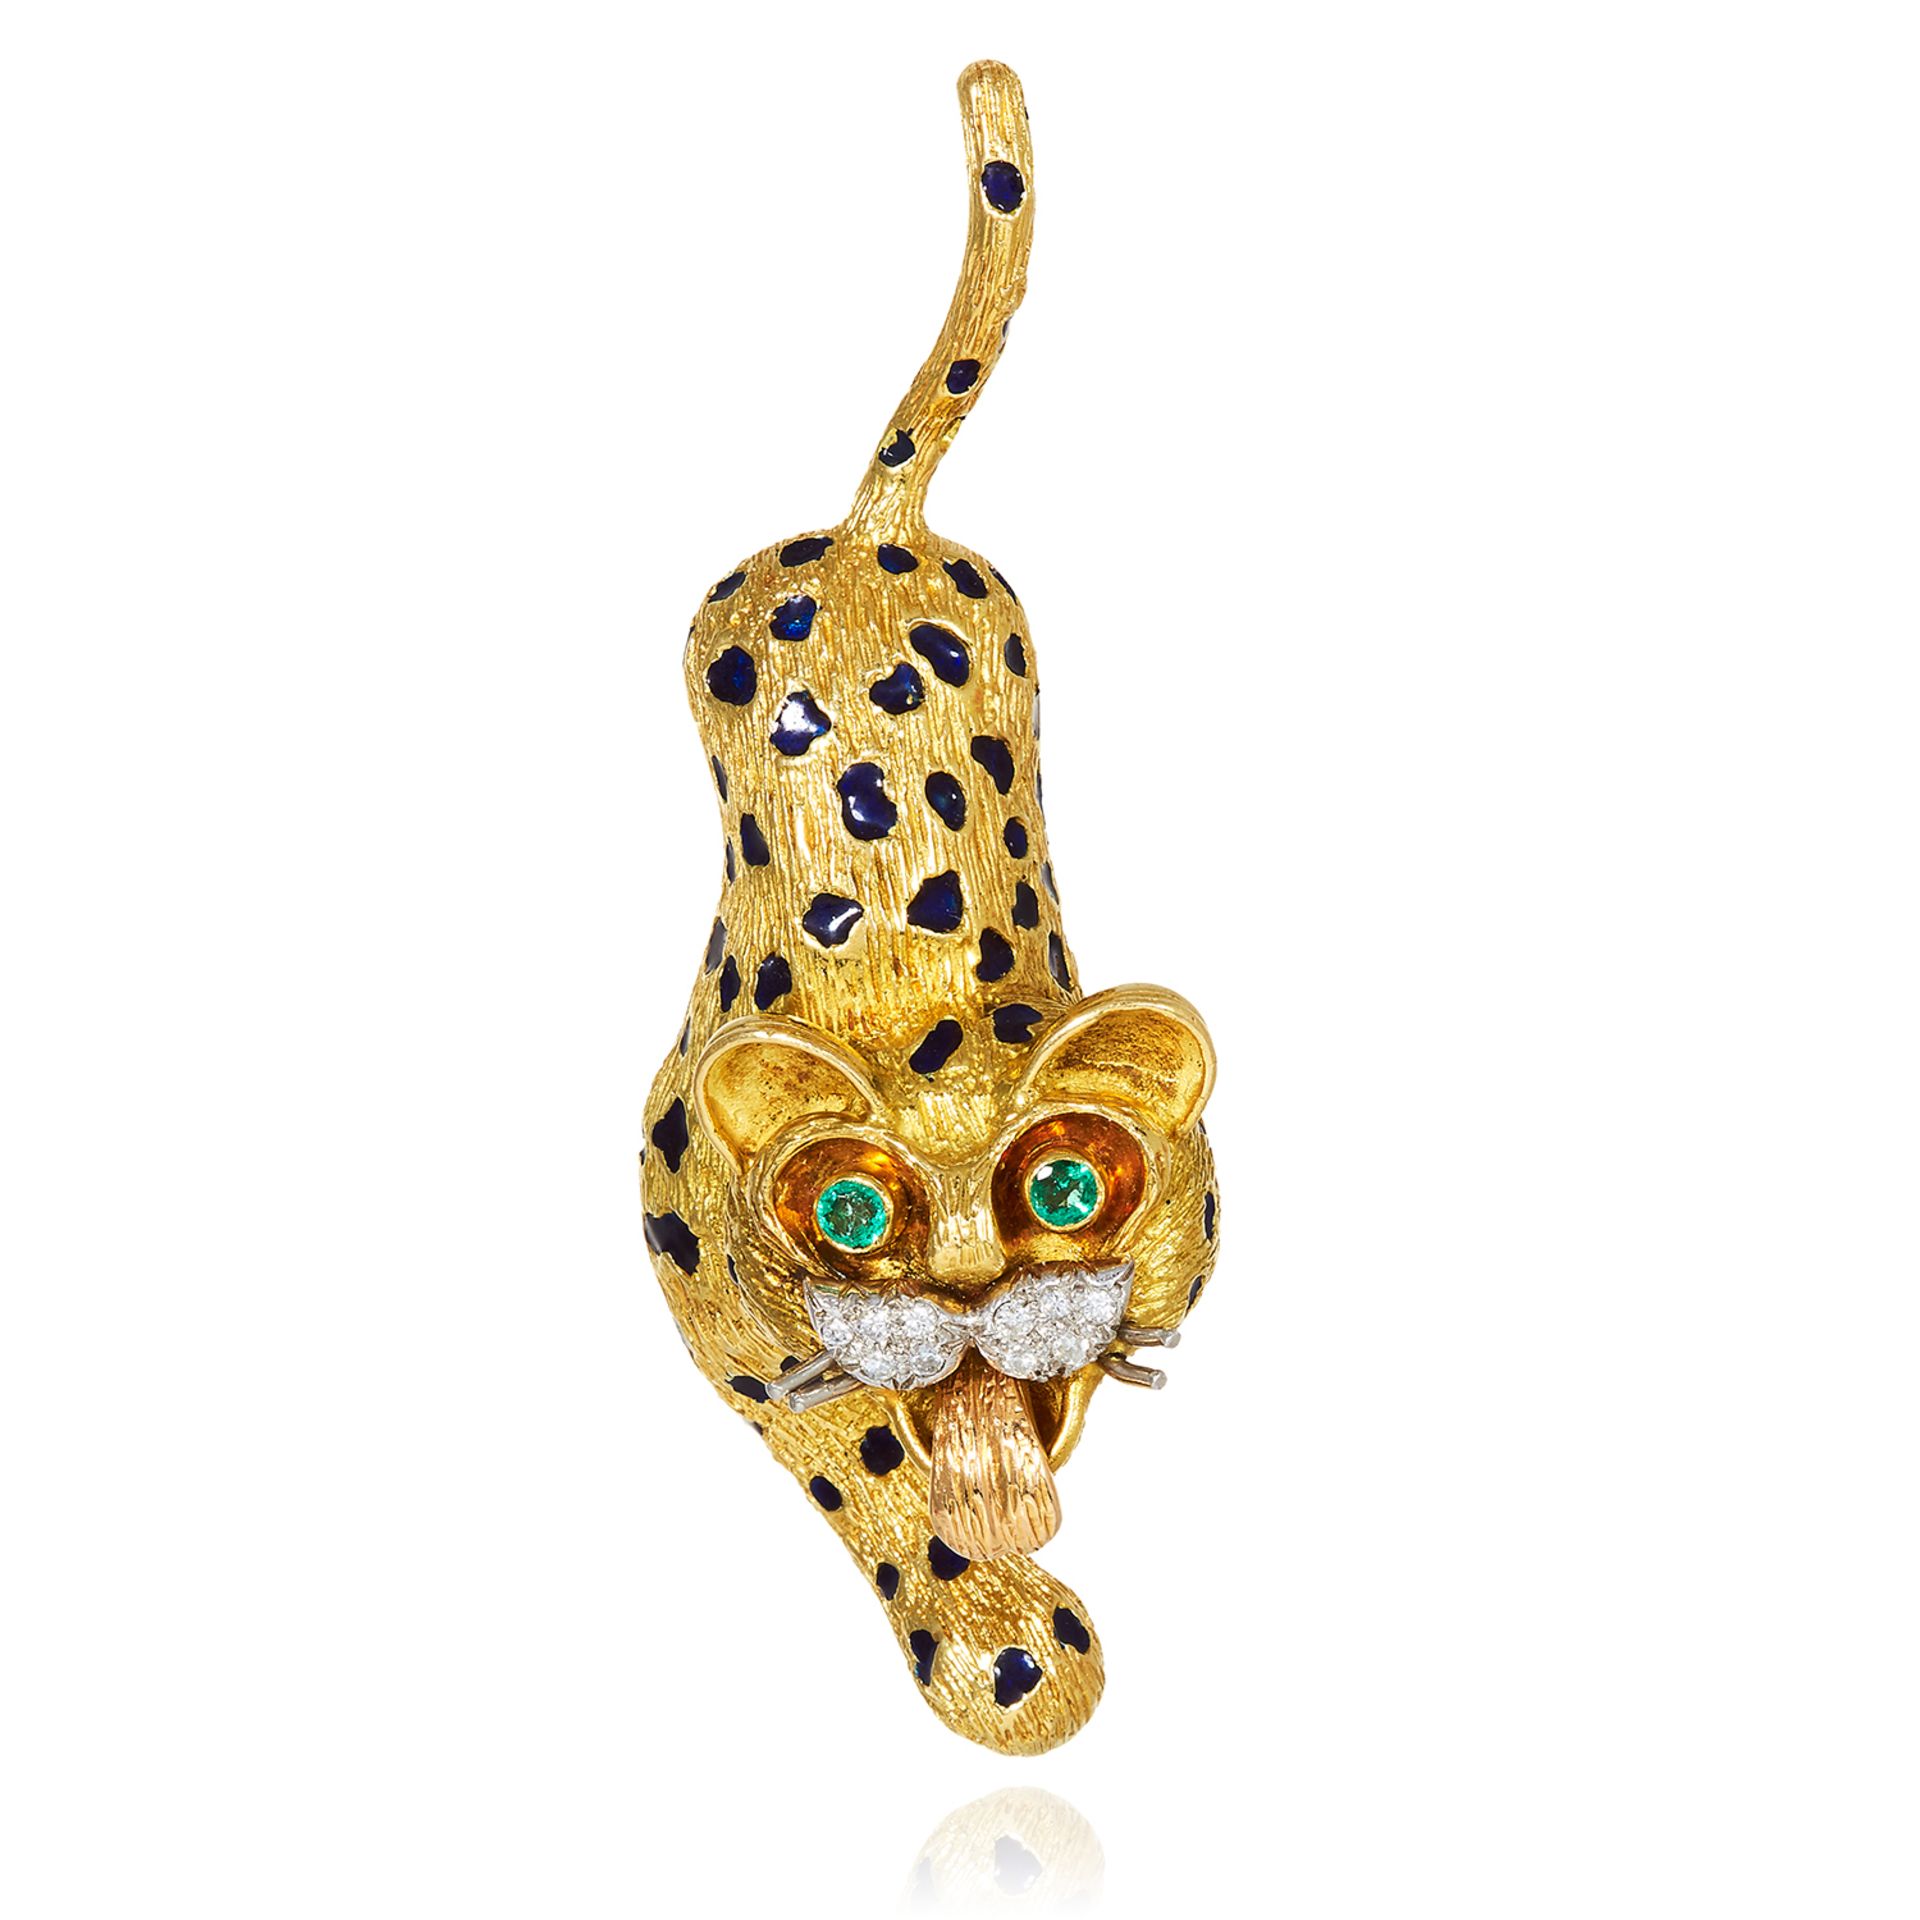 AN EMERALD, DIAMOND AND ENAMEL PANTHER BROOCH, KUTCHINSKY, CIRCA 1967 in 18ct yellow gold,